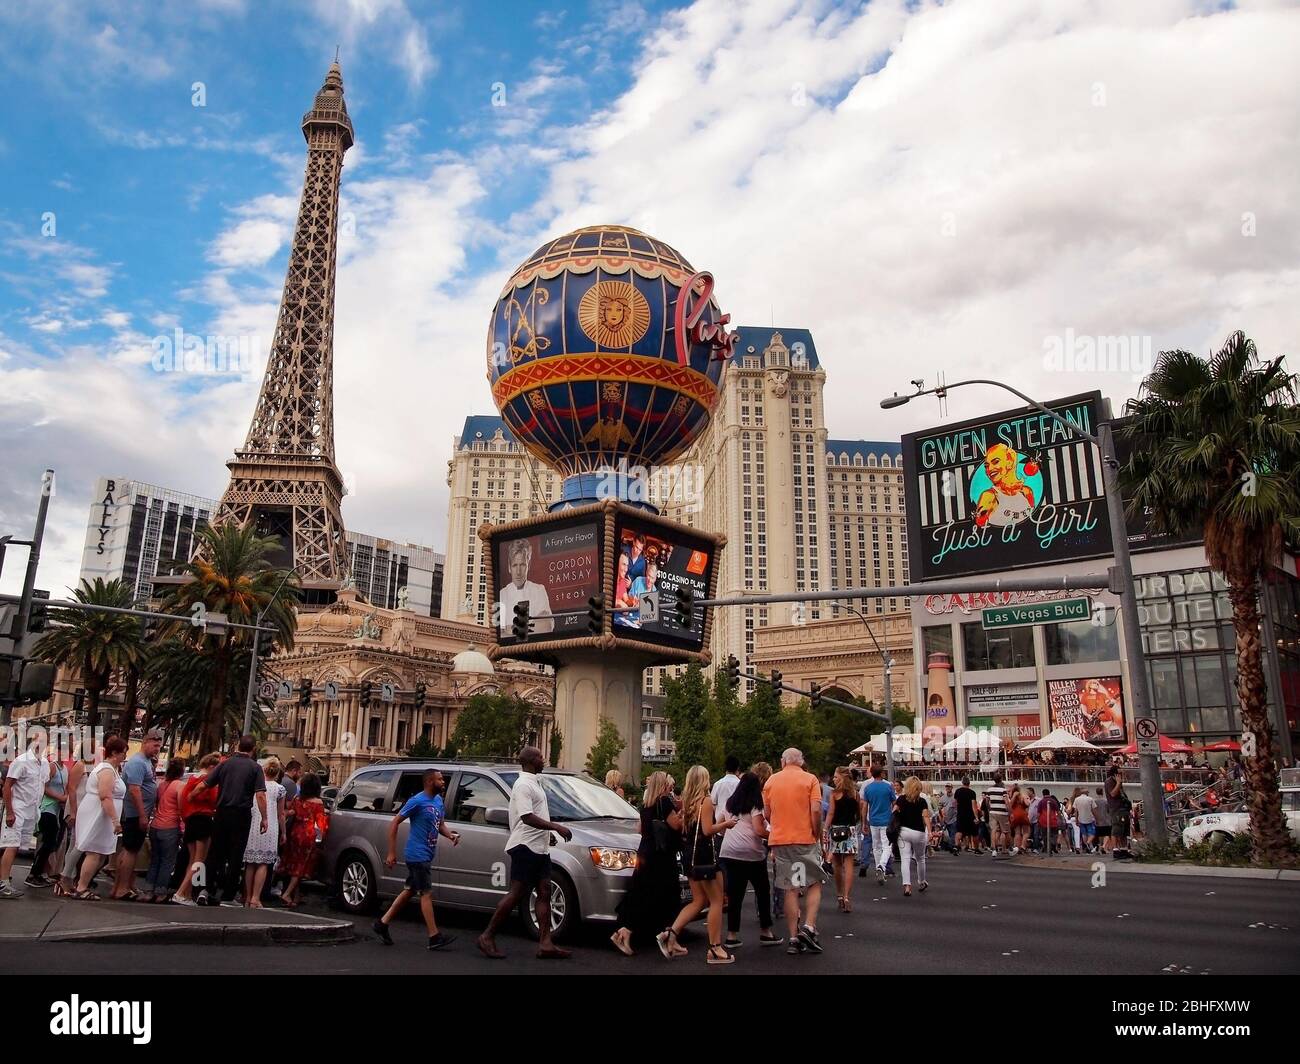 LAS VEGAS, NEVADA - JULY 21, 2018: Throngs of tourists cross Las Vegas Boulevard on a typical summer day visiting casinos, restaurants and other venue Stock Photo